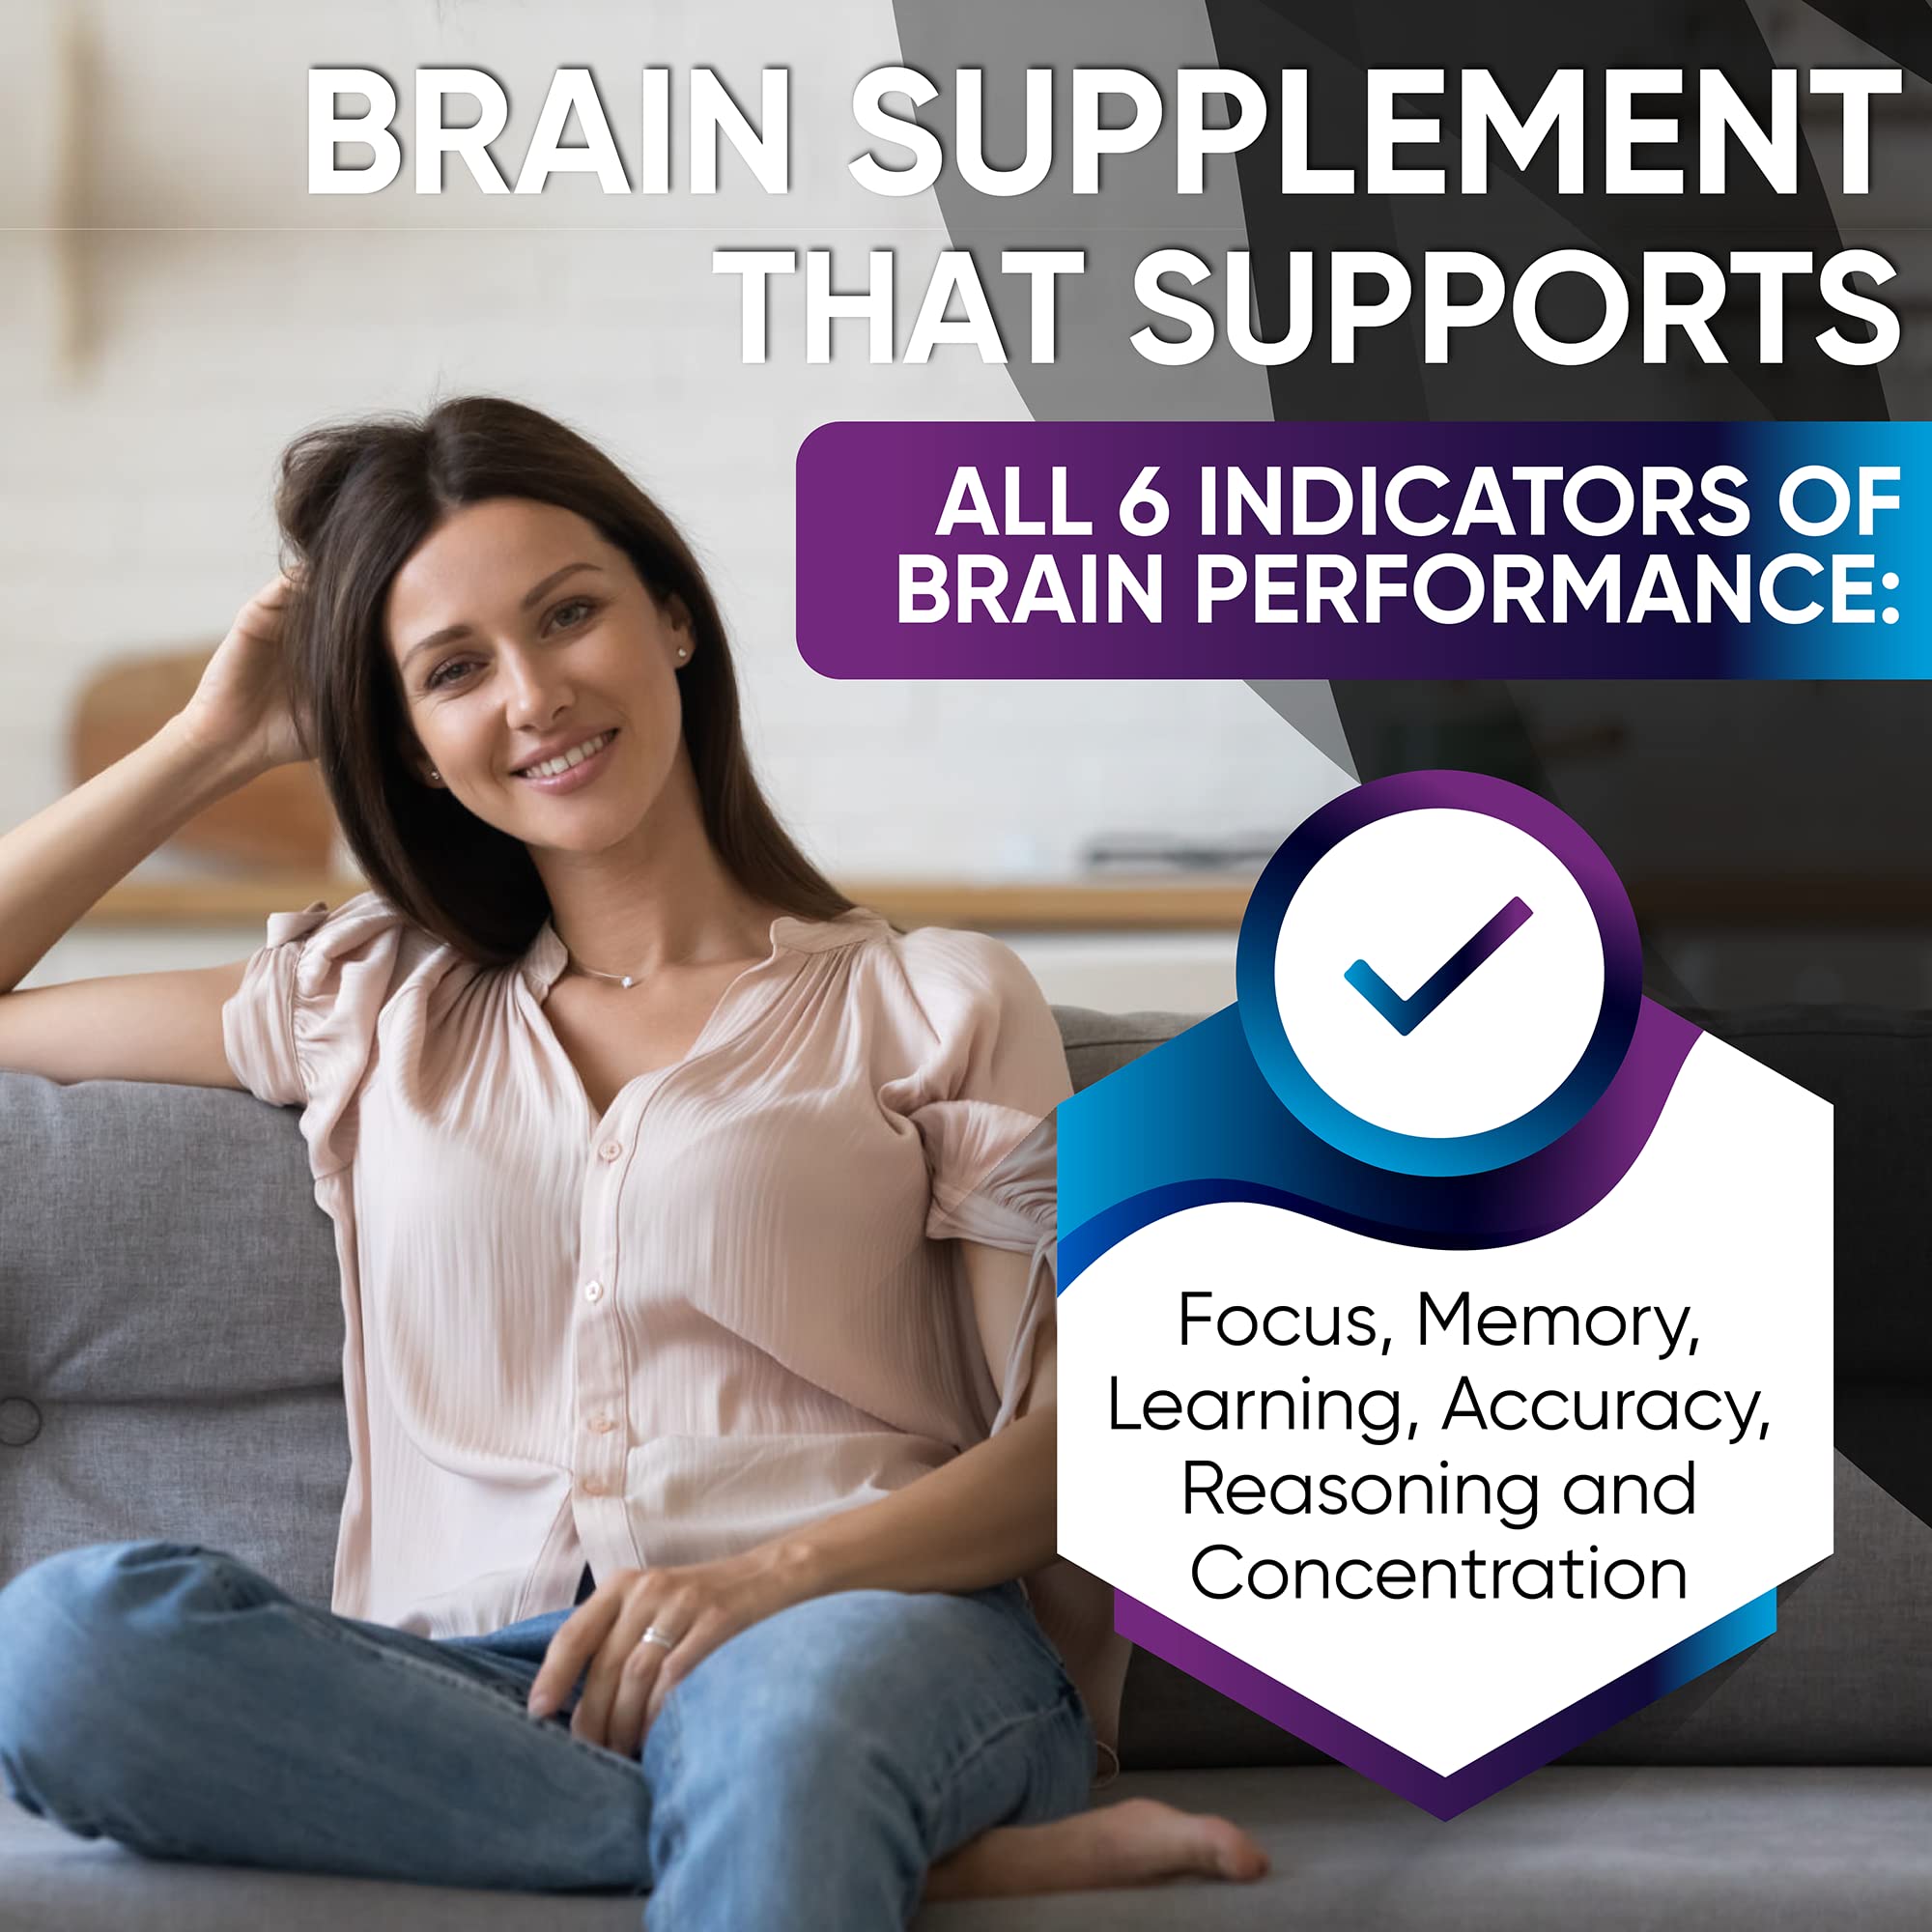 Nootropic Brain Booster Supplement - Memory, Focus & Concentration Support with Vitamins B6 & B12, Proven and Tested Phosphatidylserine - Natural Cognitive Function & Energy Boost, 60 Capsules